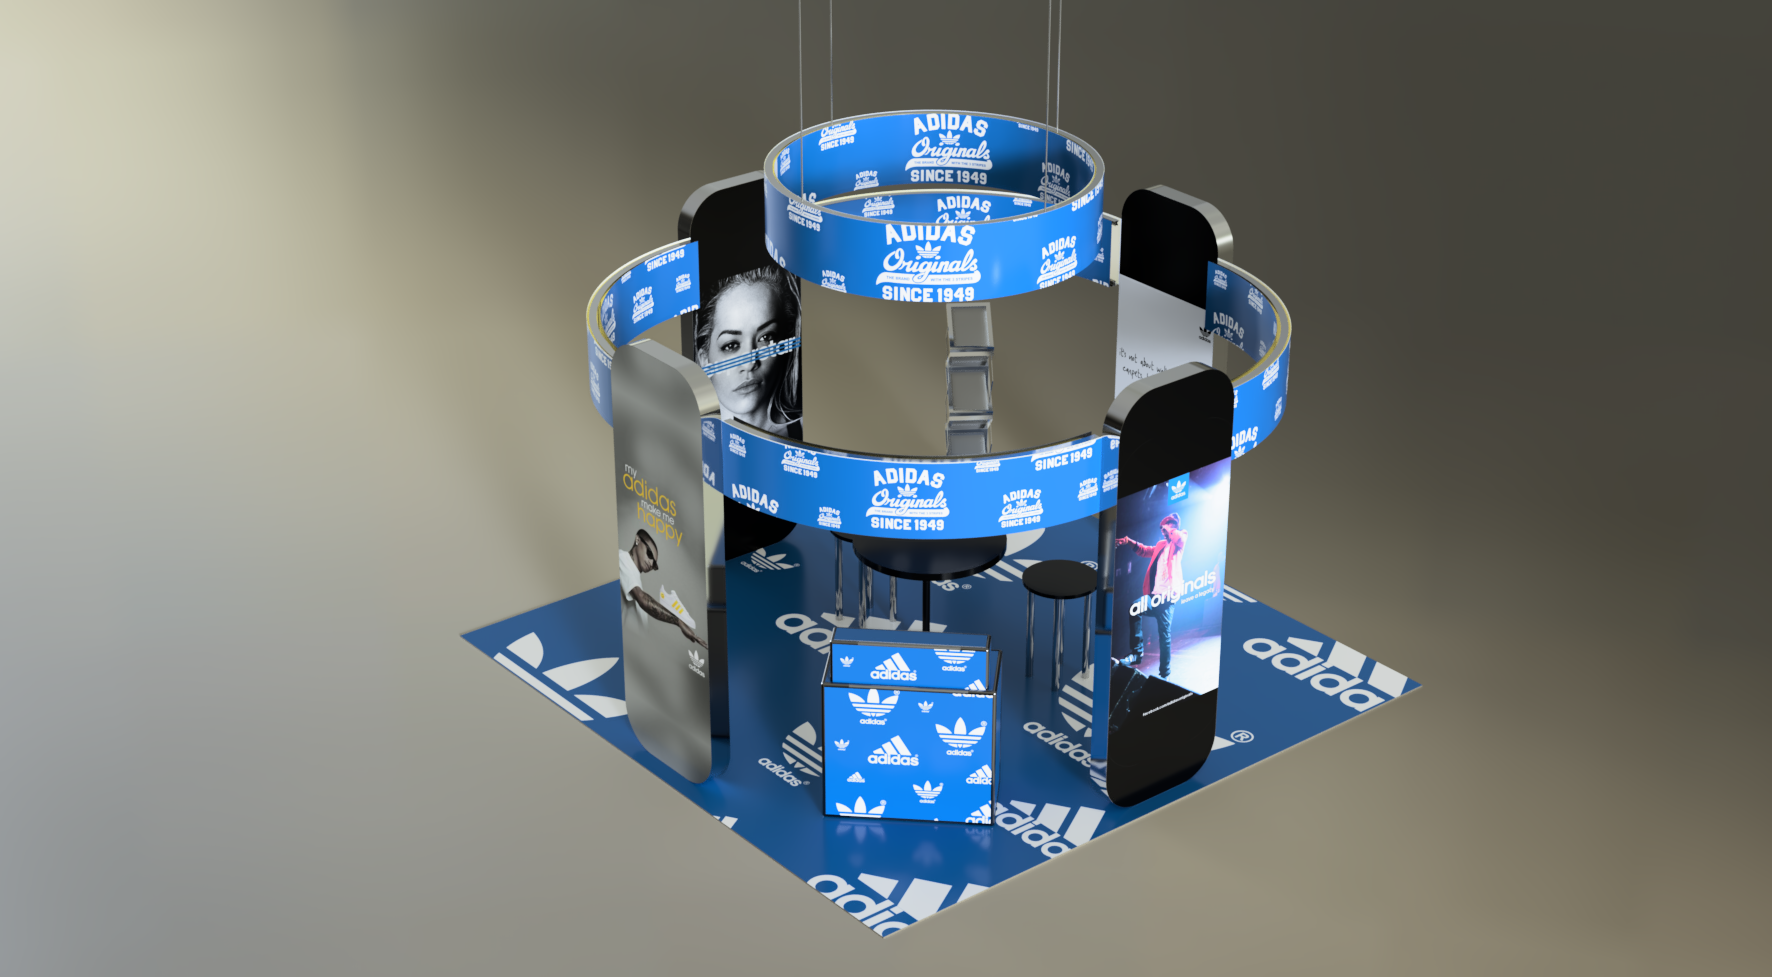 Exhibition Stand – 014